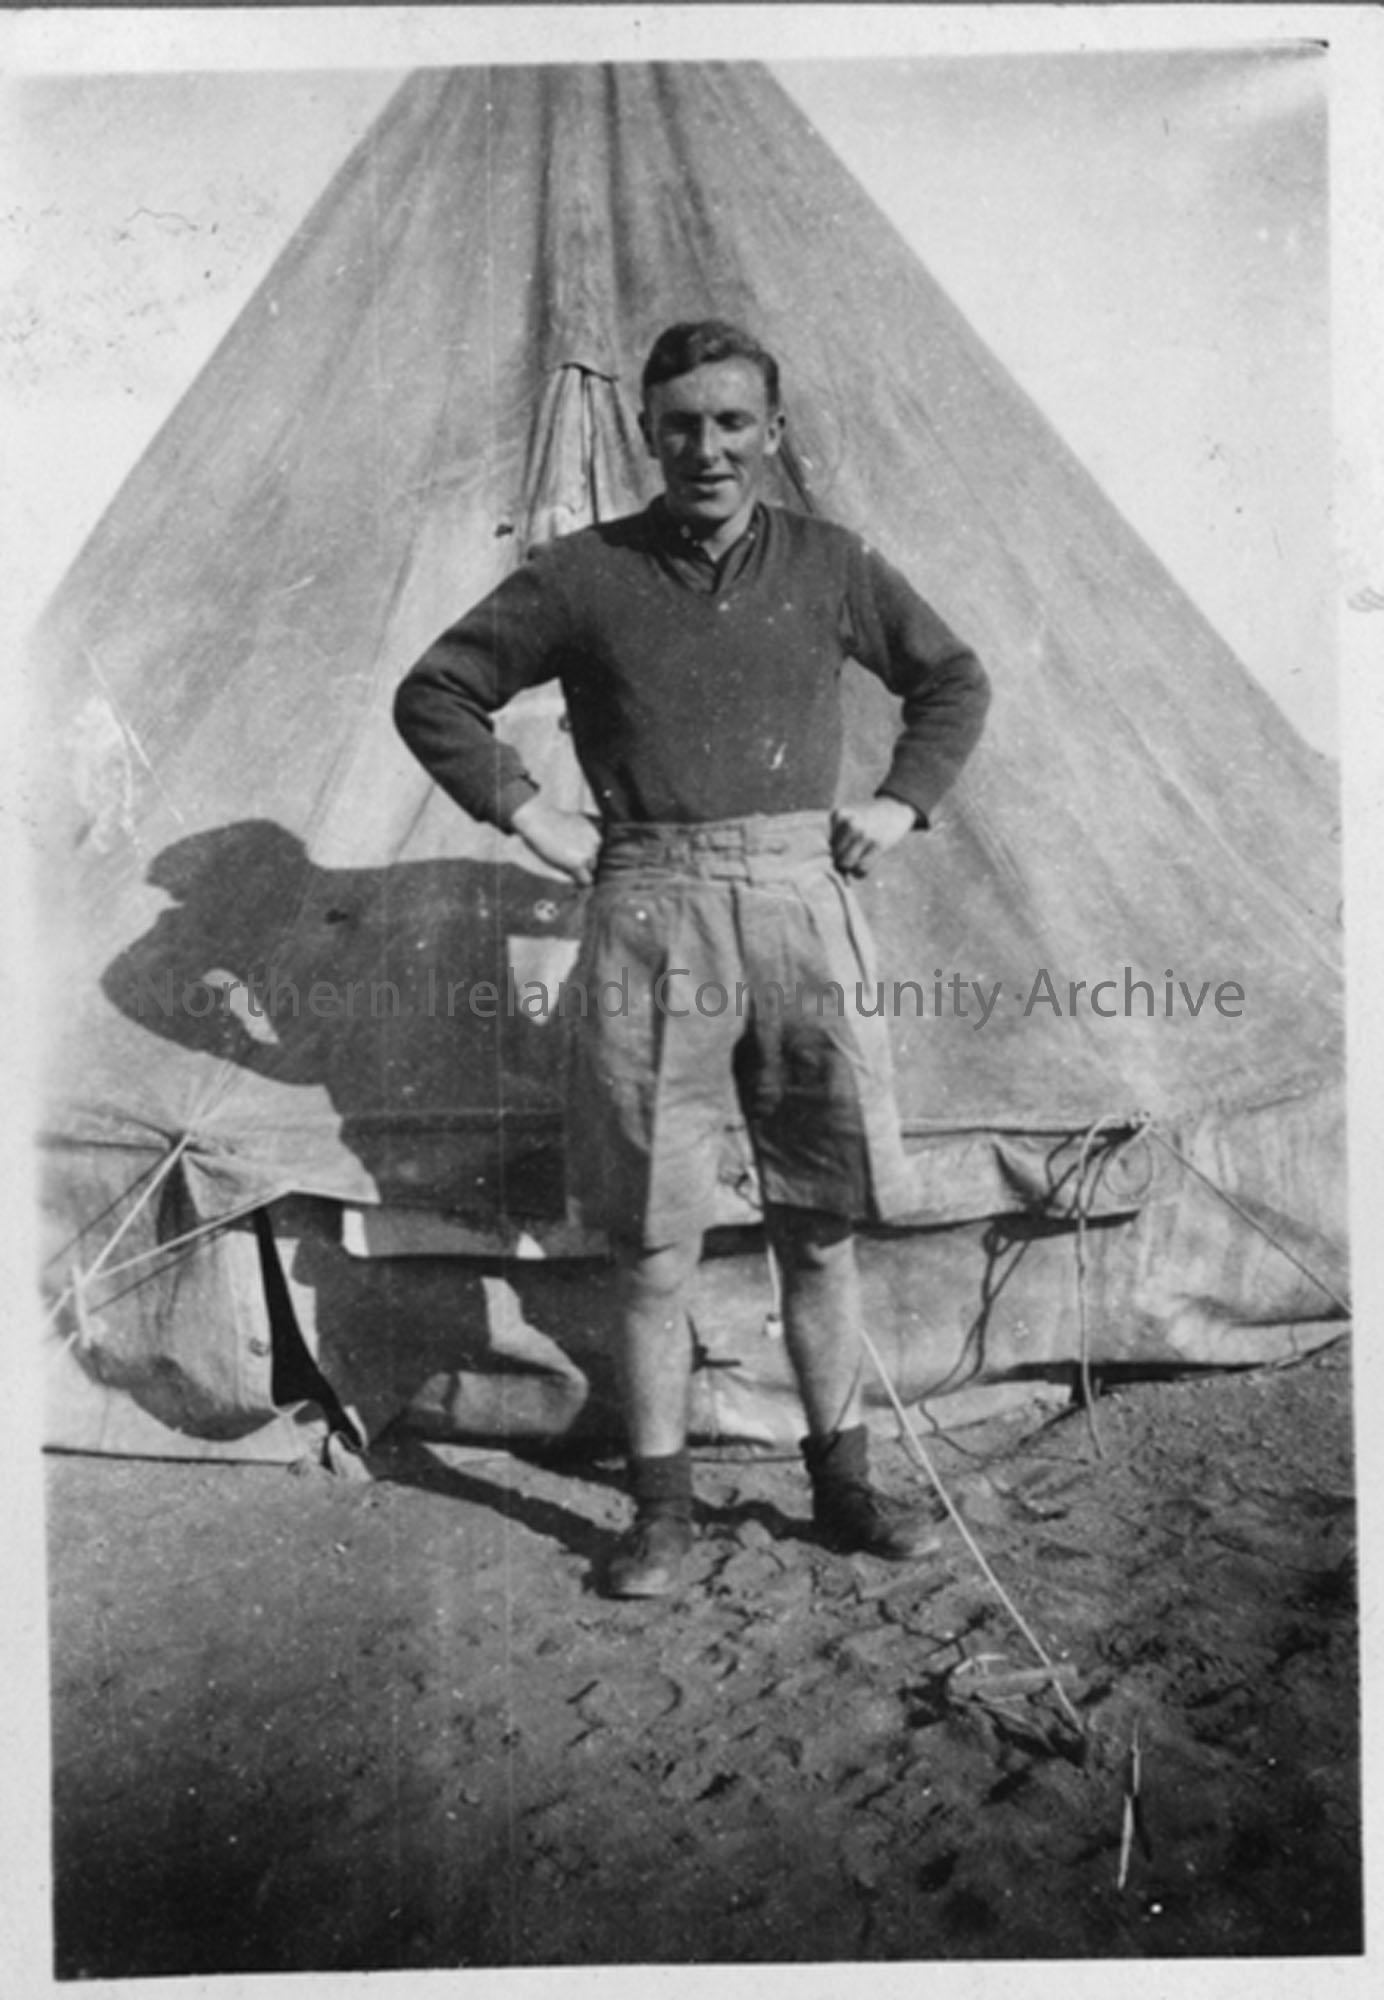 J Robinson Hands on hips outside his tent on Suez Canal